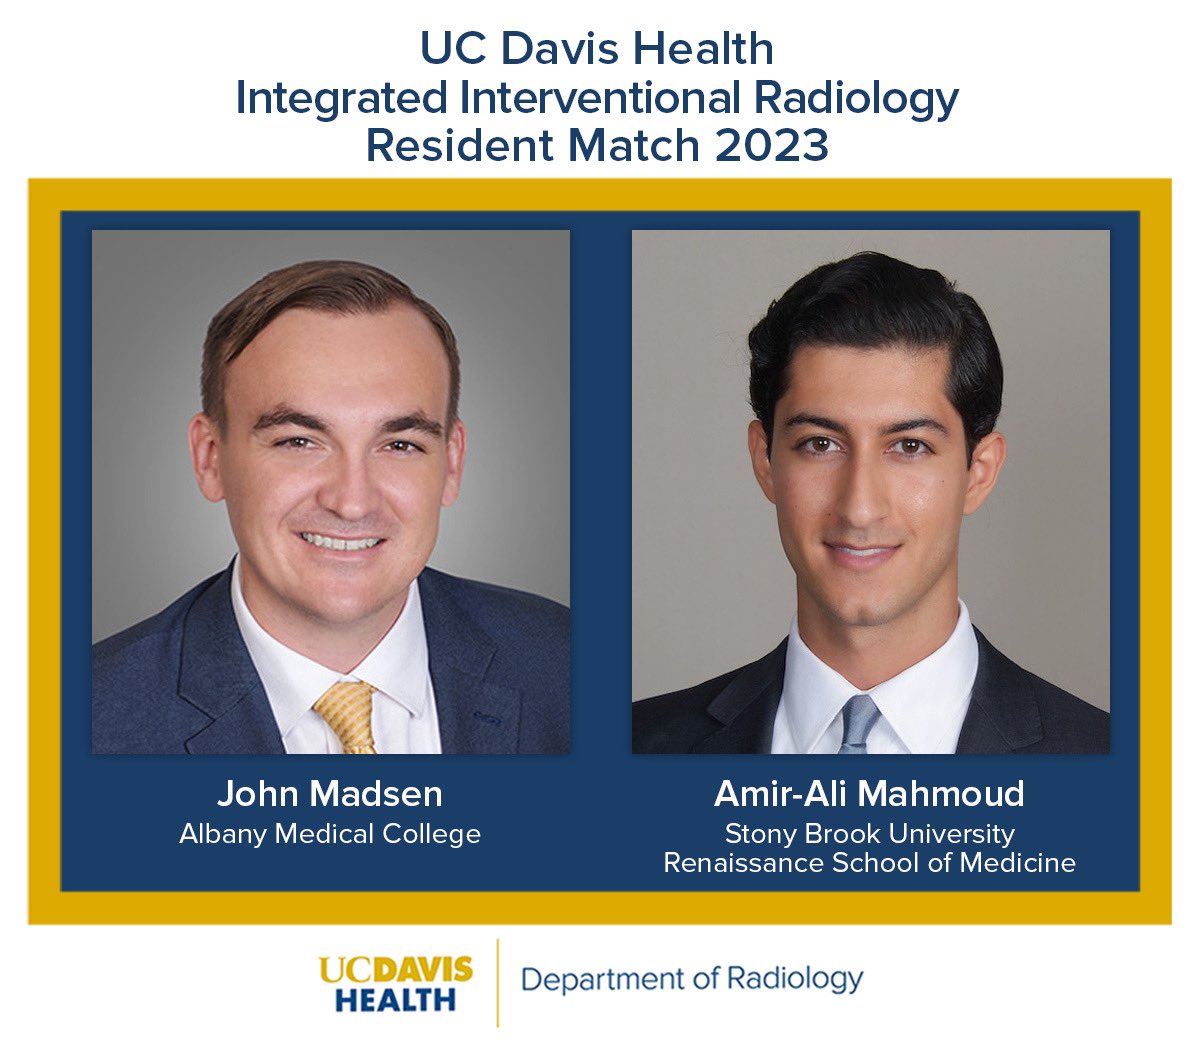 Thrilled to match 2 stellar future #IRads to our IR residency. Welcome to @UCDavisHealth John Madsen and Amir-Ali Mahmoud!